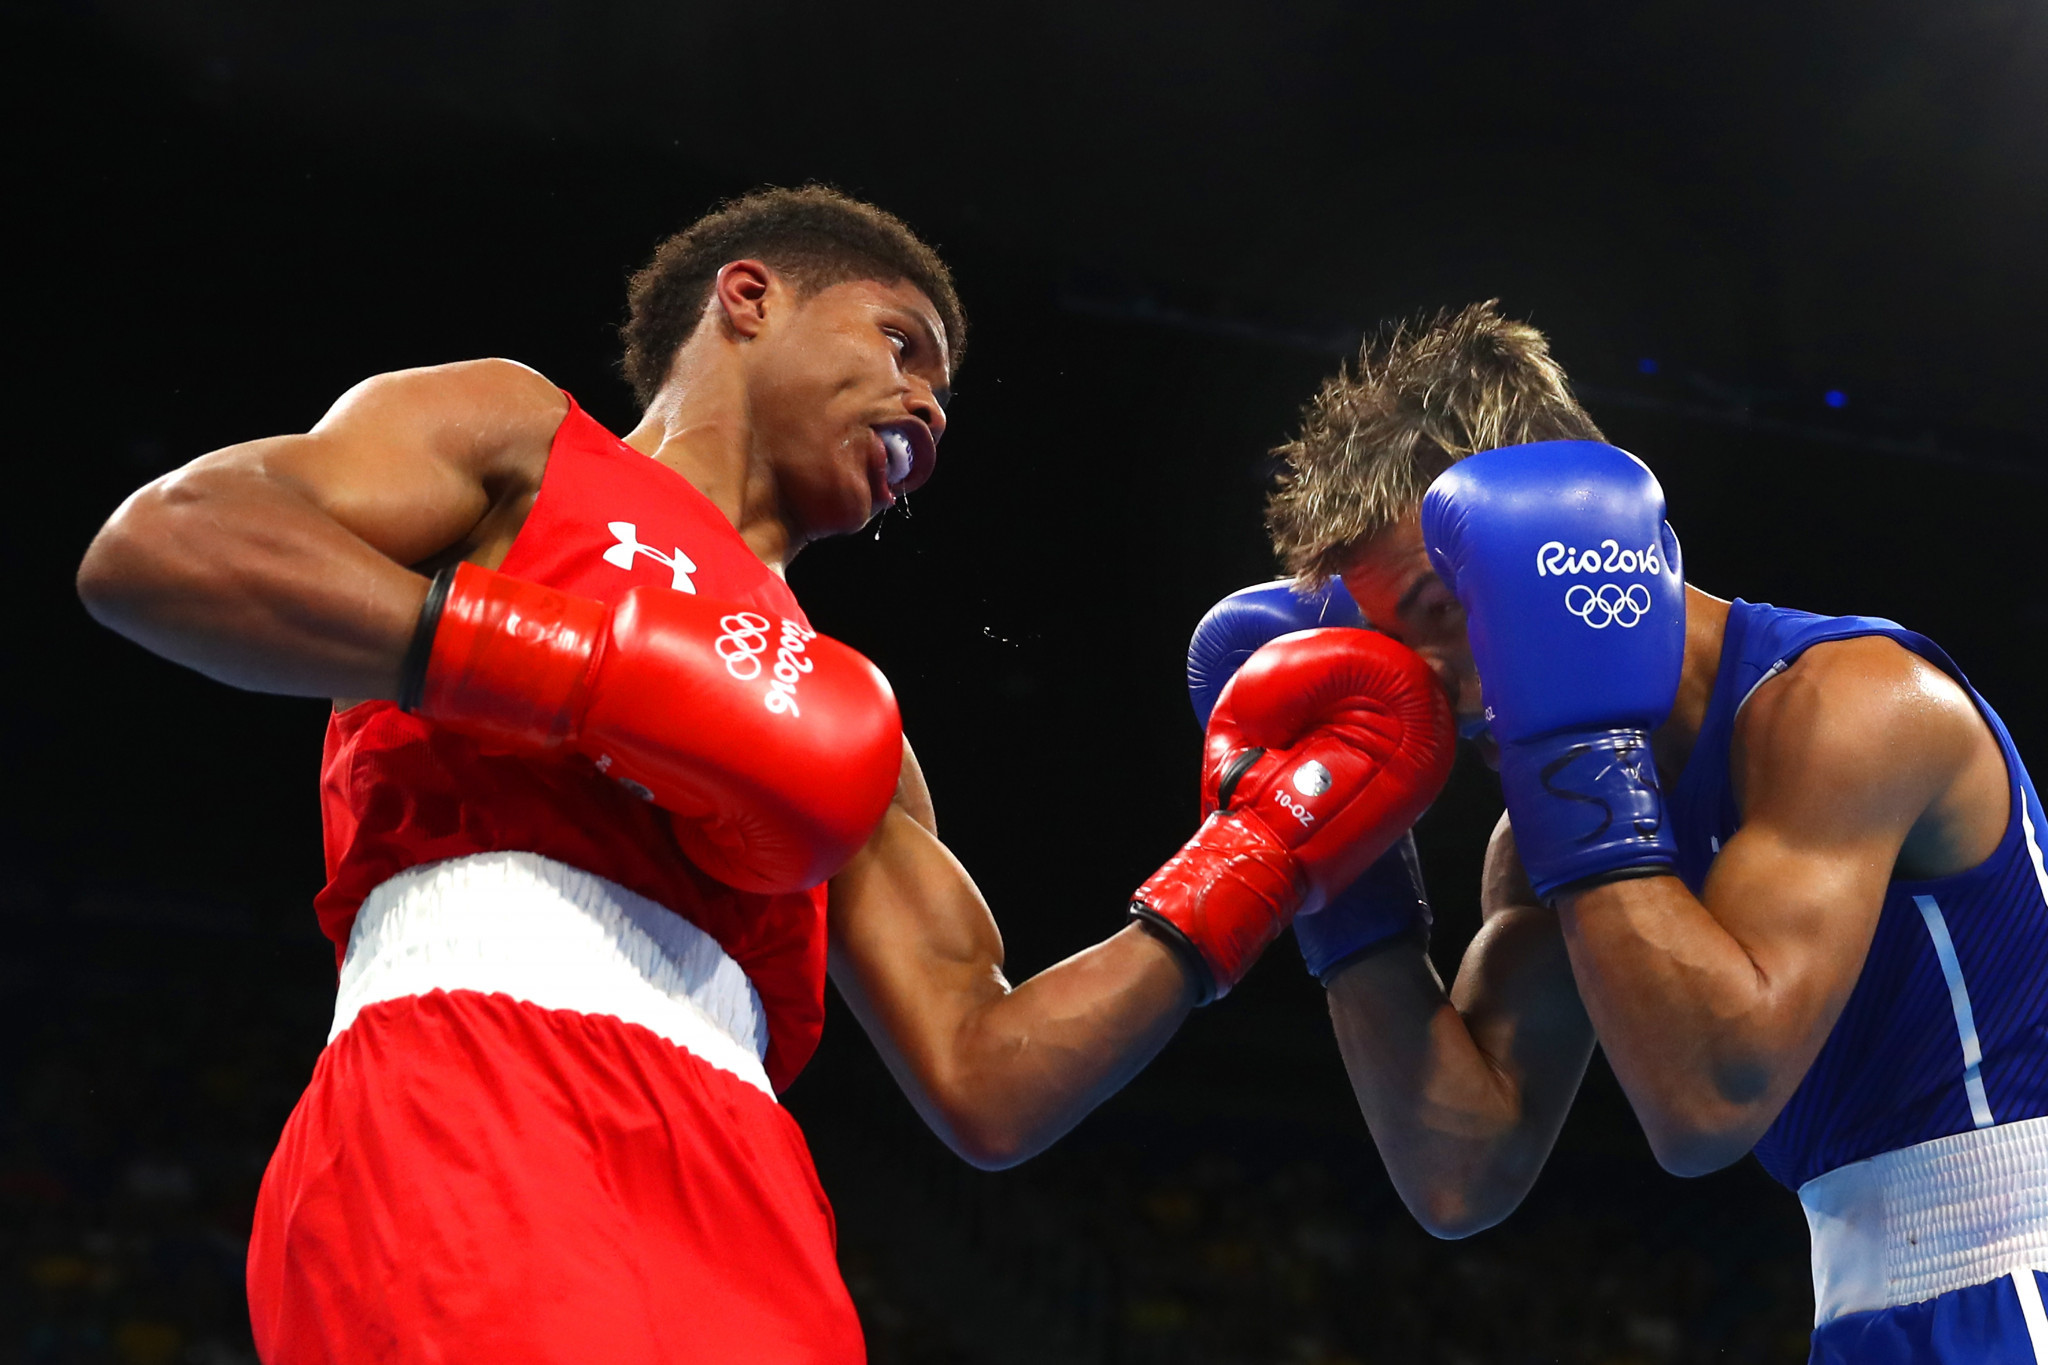 Boxing's place at the Olympic Games remains in doubt ©Getty Images